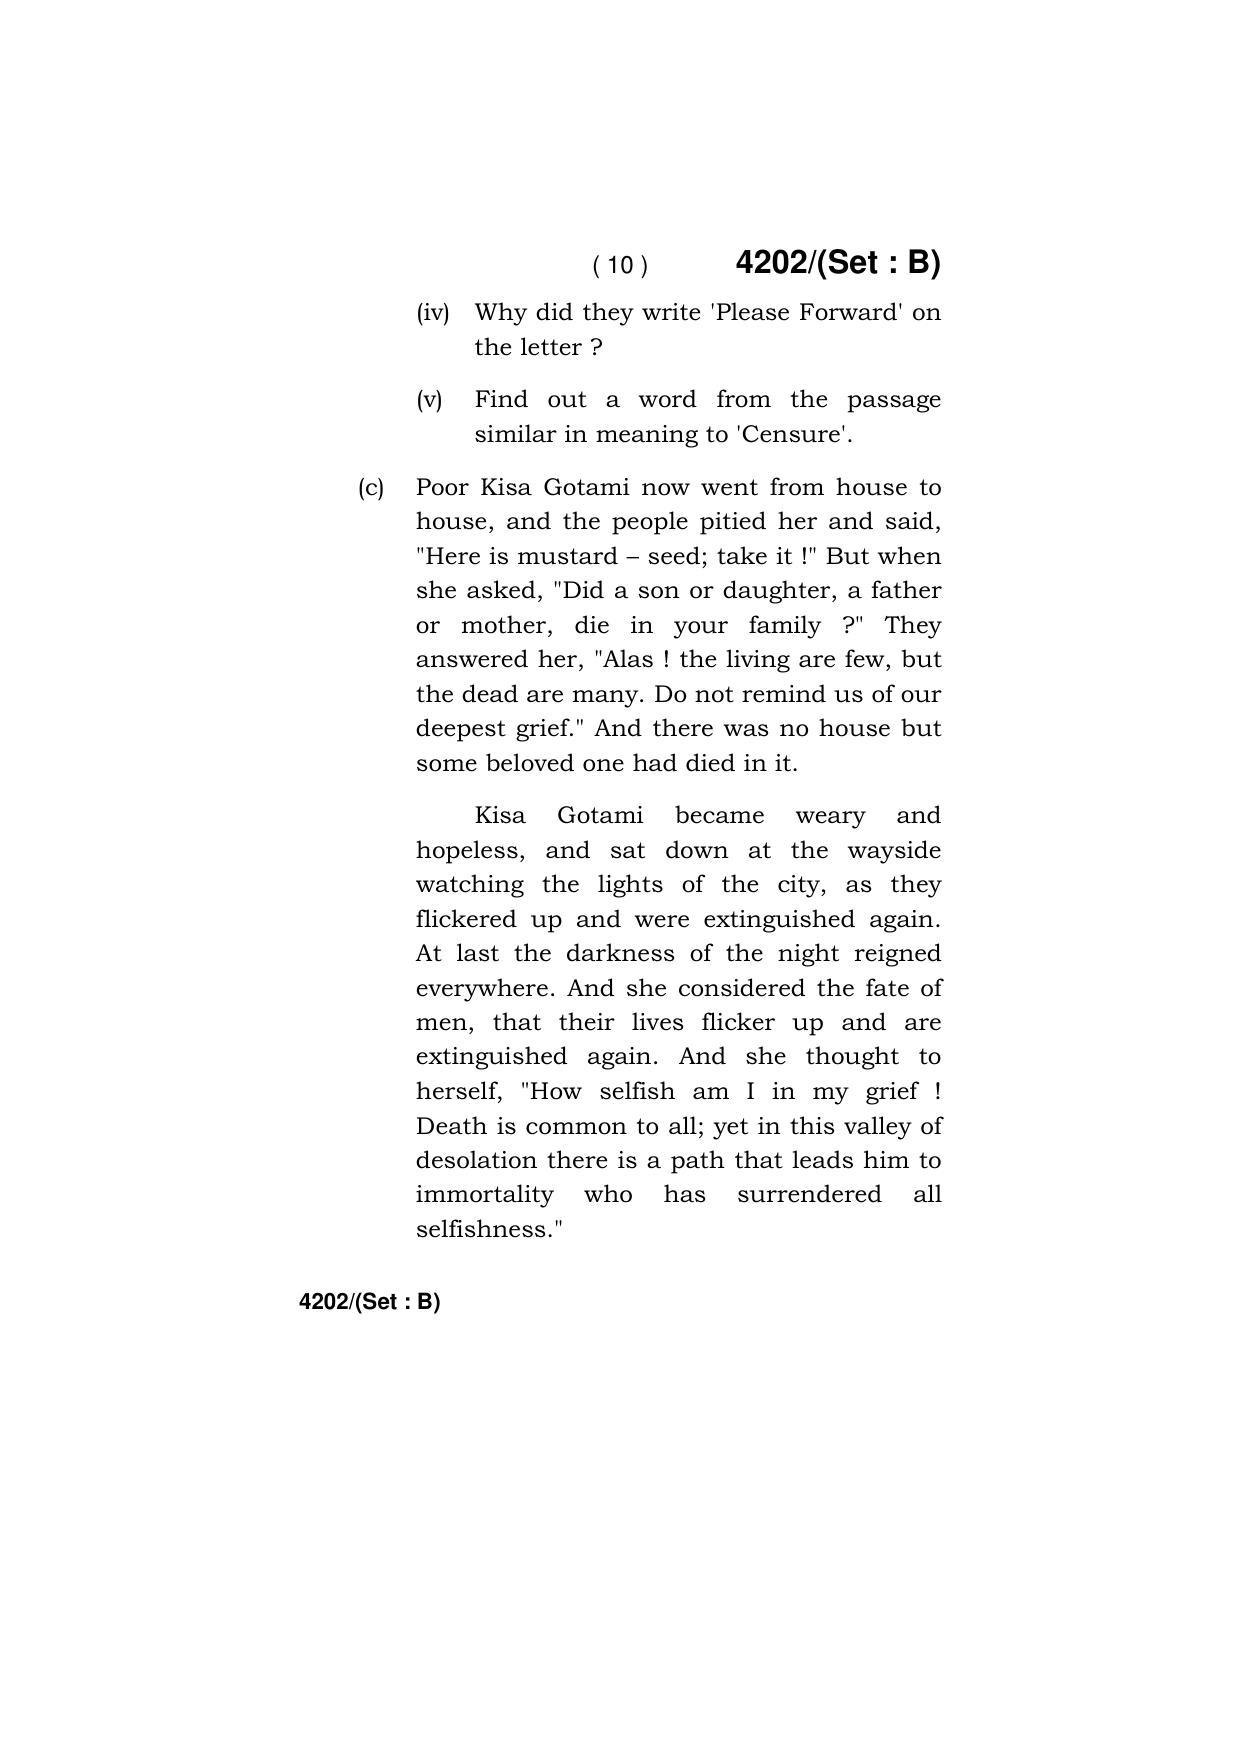 Haryana Board HBSE Class 10 English (All Set) 2019 Question Paper - Page 26